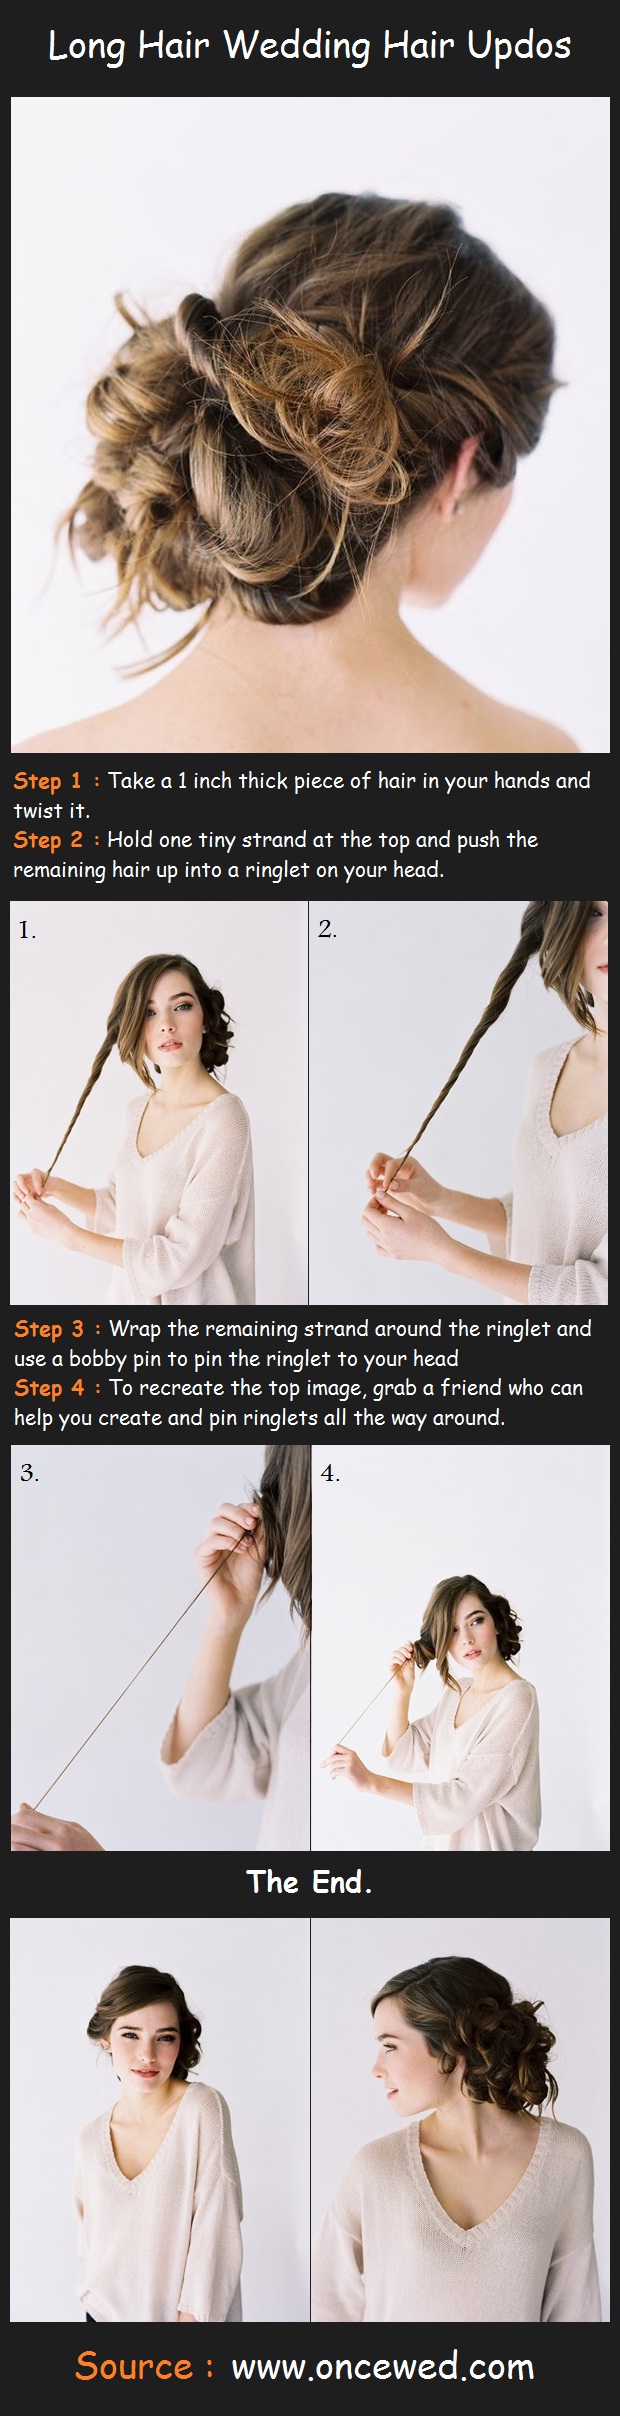 Hairstyle Tutorials For Long Hair